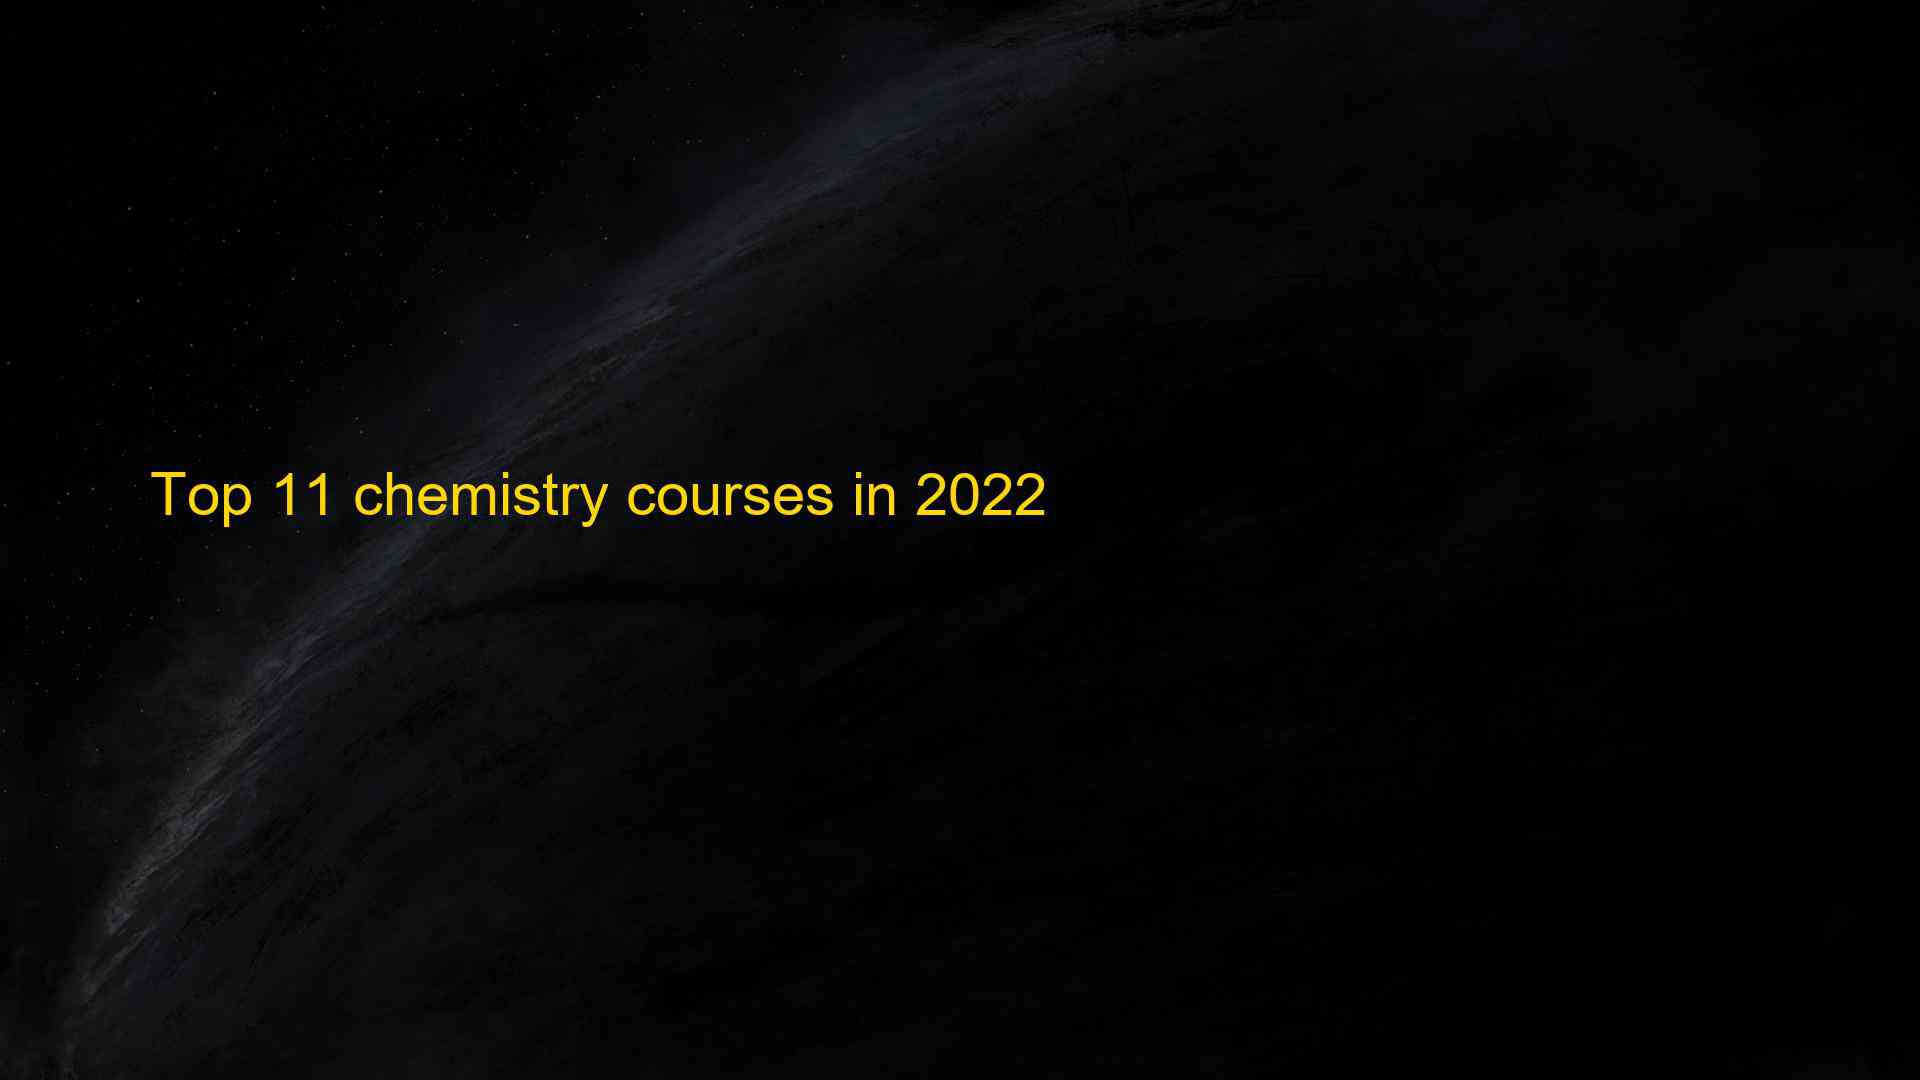 Top 11 chemistry courses in 2022 1661945506